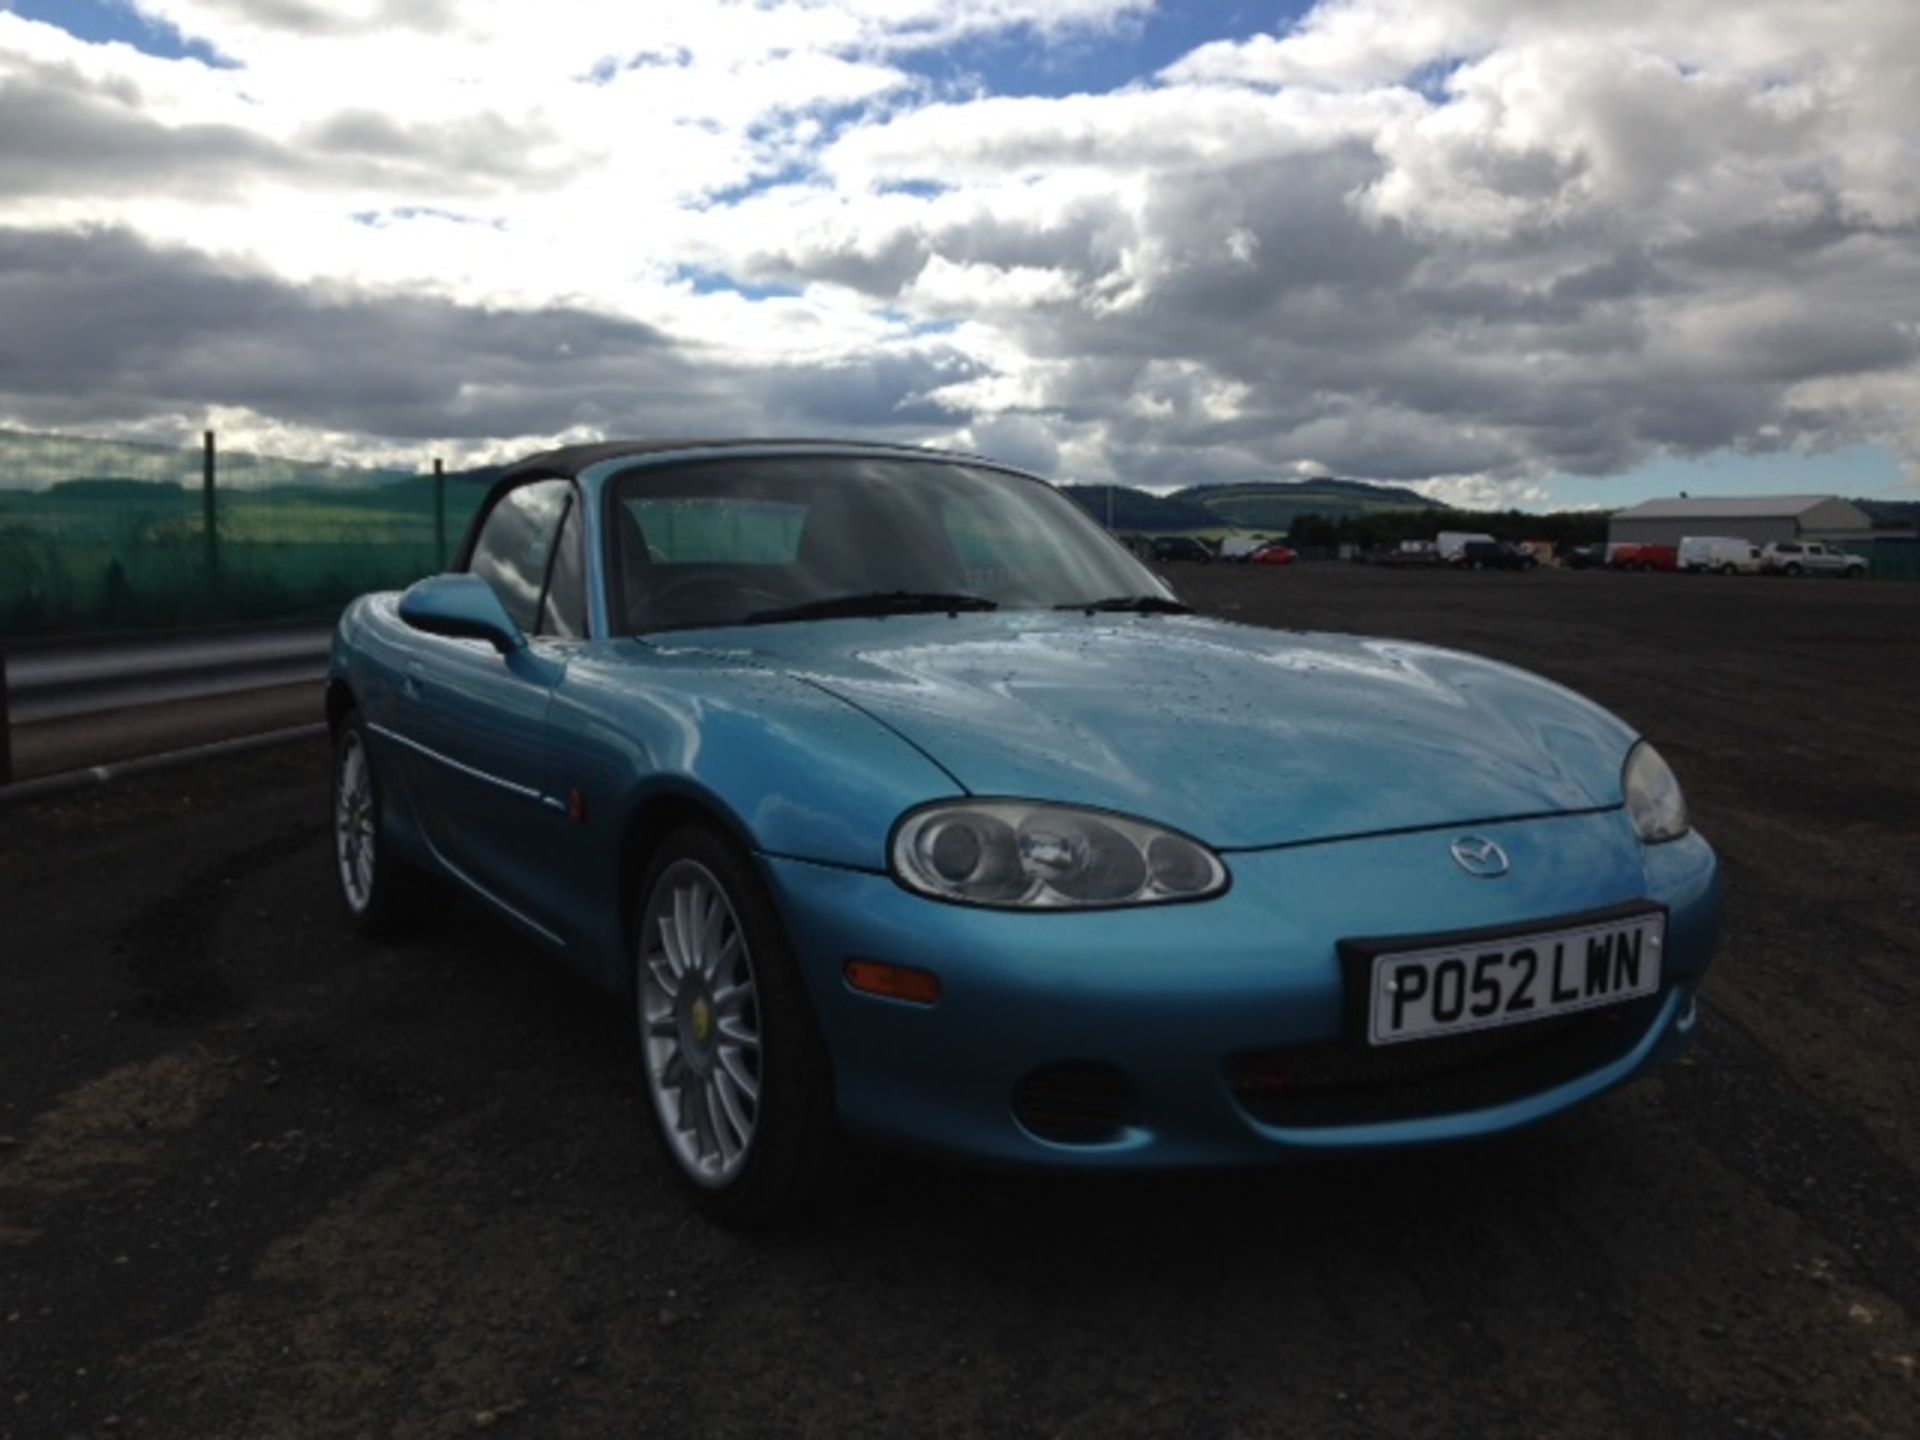 MAZDA, MX-5 1.8I - 1840cc, Chassis number JMZNB18P200223449 - presented in Crystal Blue Metallic, - Image 4 of 11